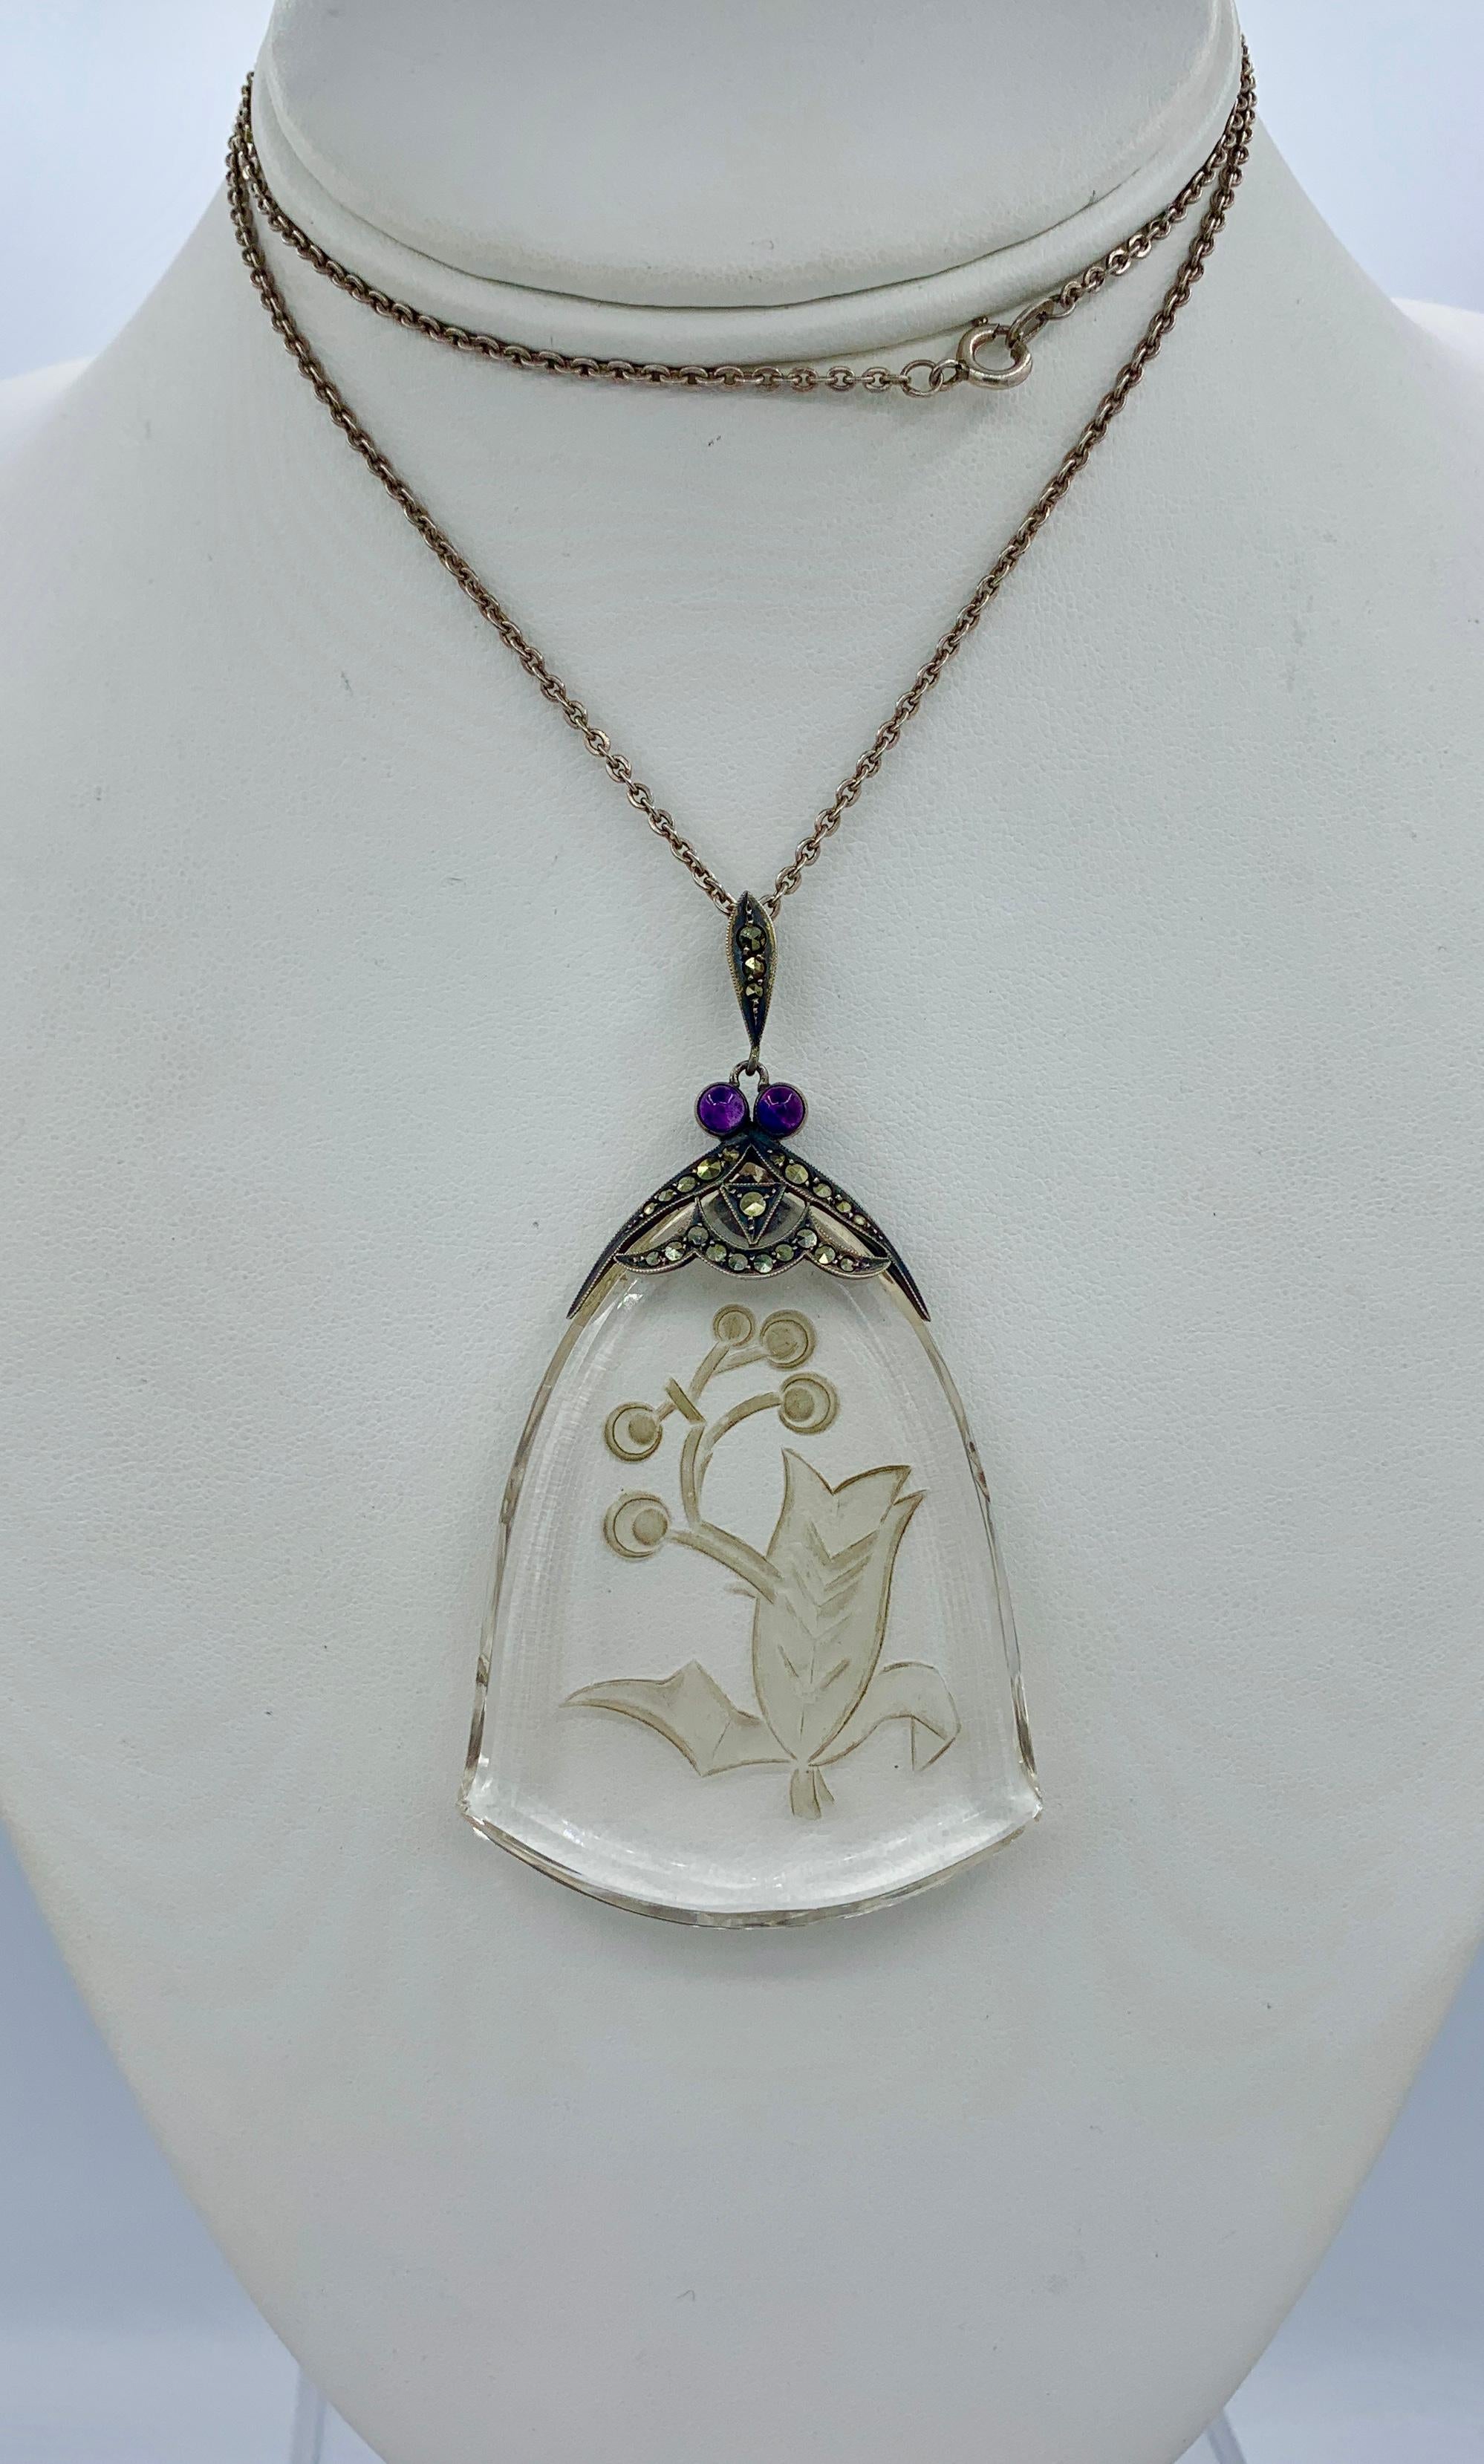 THIS IS A WONDERFUL AND VERY RARE MUSEUM QUALITY ORIGINAL ART DECO PENDANT NECKLACE WITH AN EXTRAORDINARY FLOWER MOTIF CARVED ROCK CRYSTAL PENDANT SET IN A STERLING SILVER SURMOUNT WITH TWO ROUND AMETHYST CABOCHONS AND MARCASITES AND A MARCASITE SET